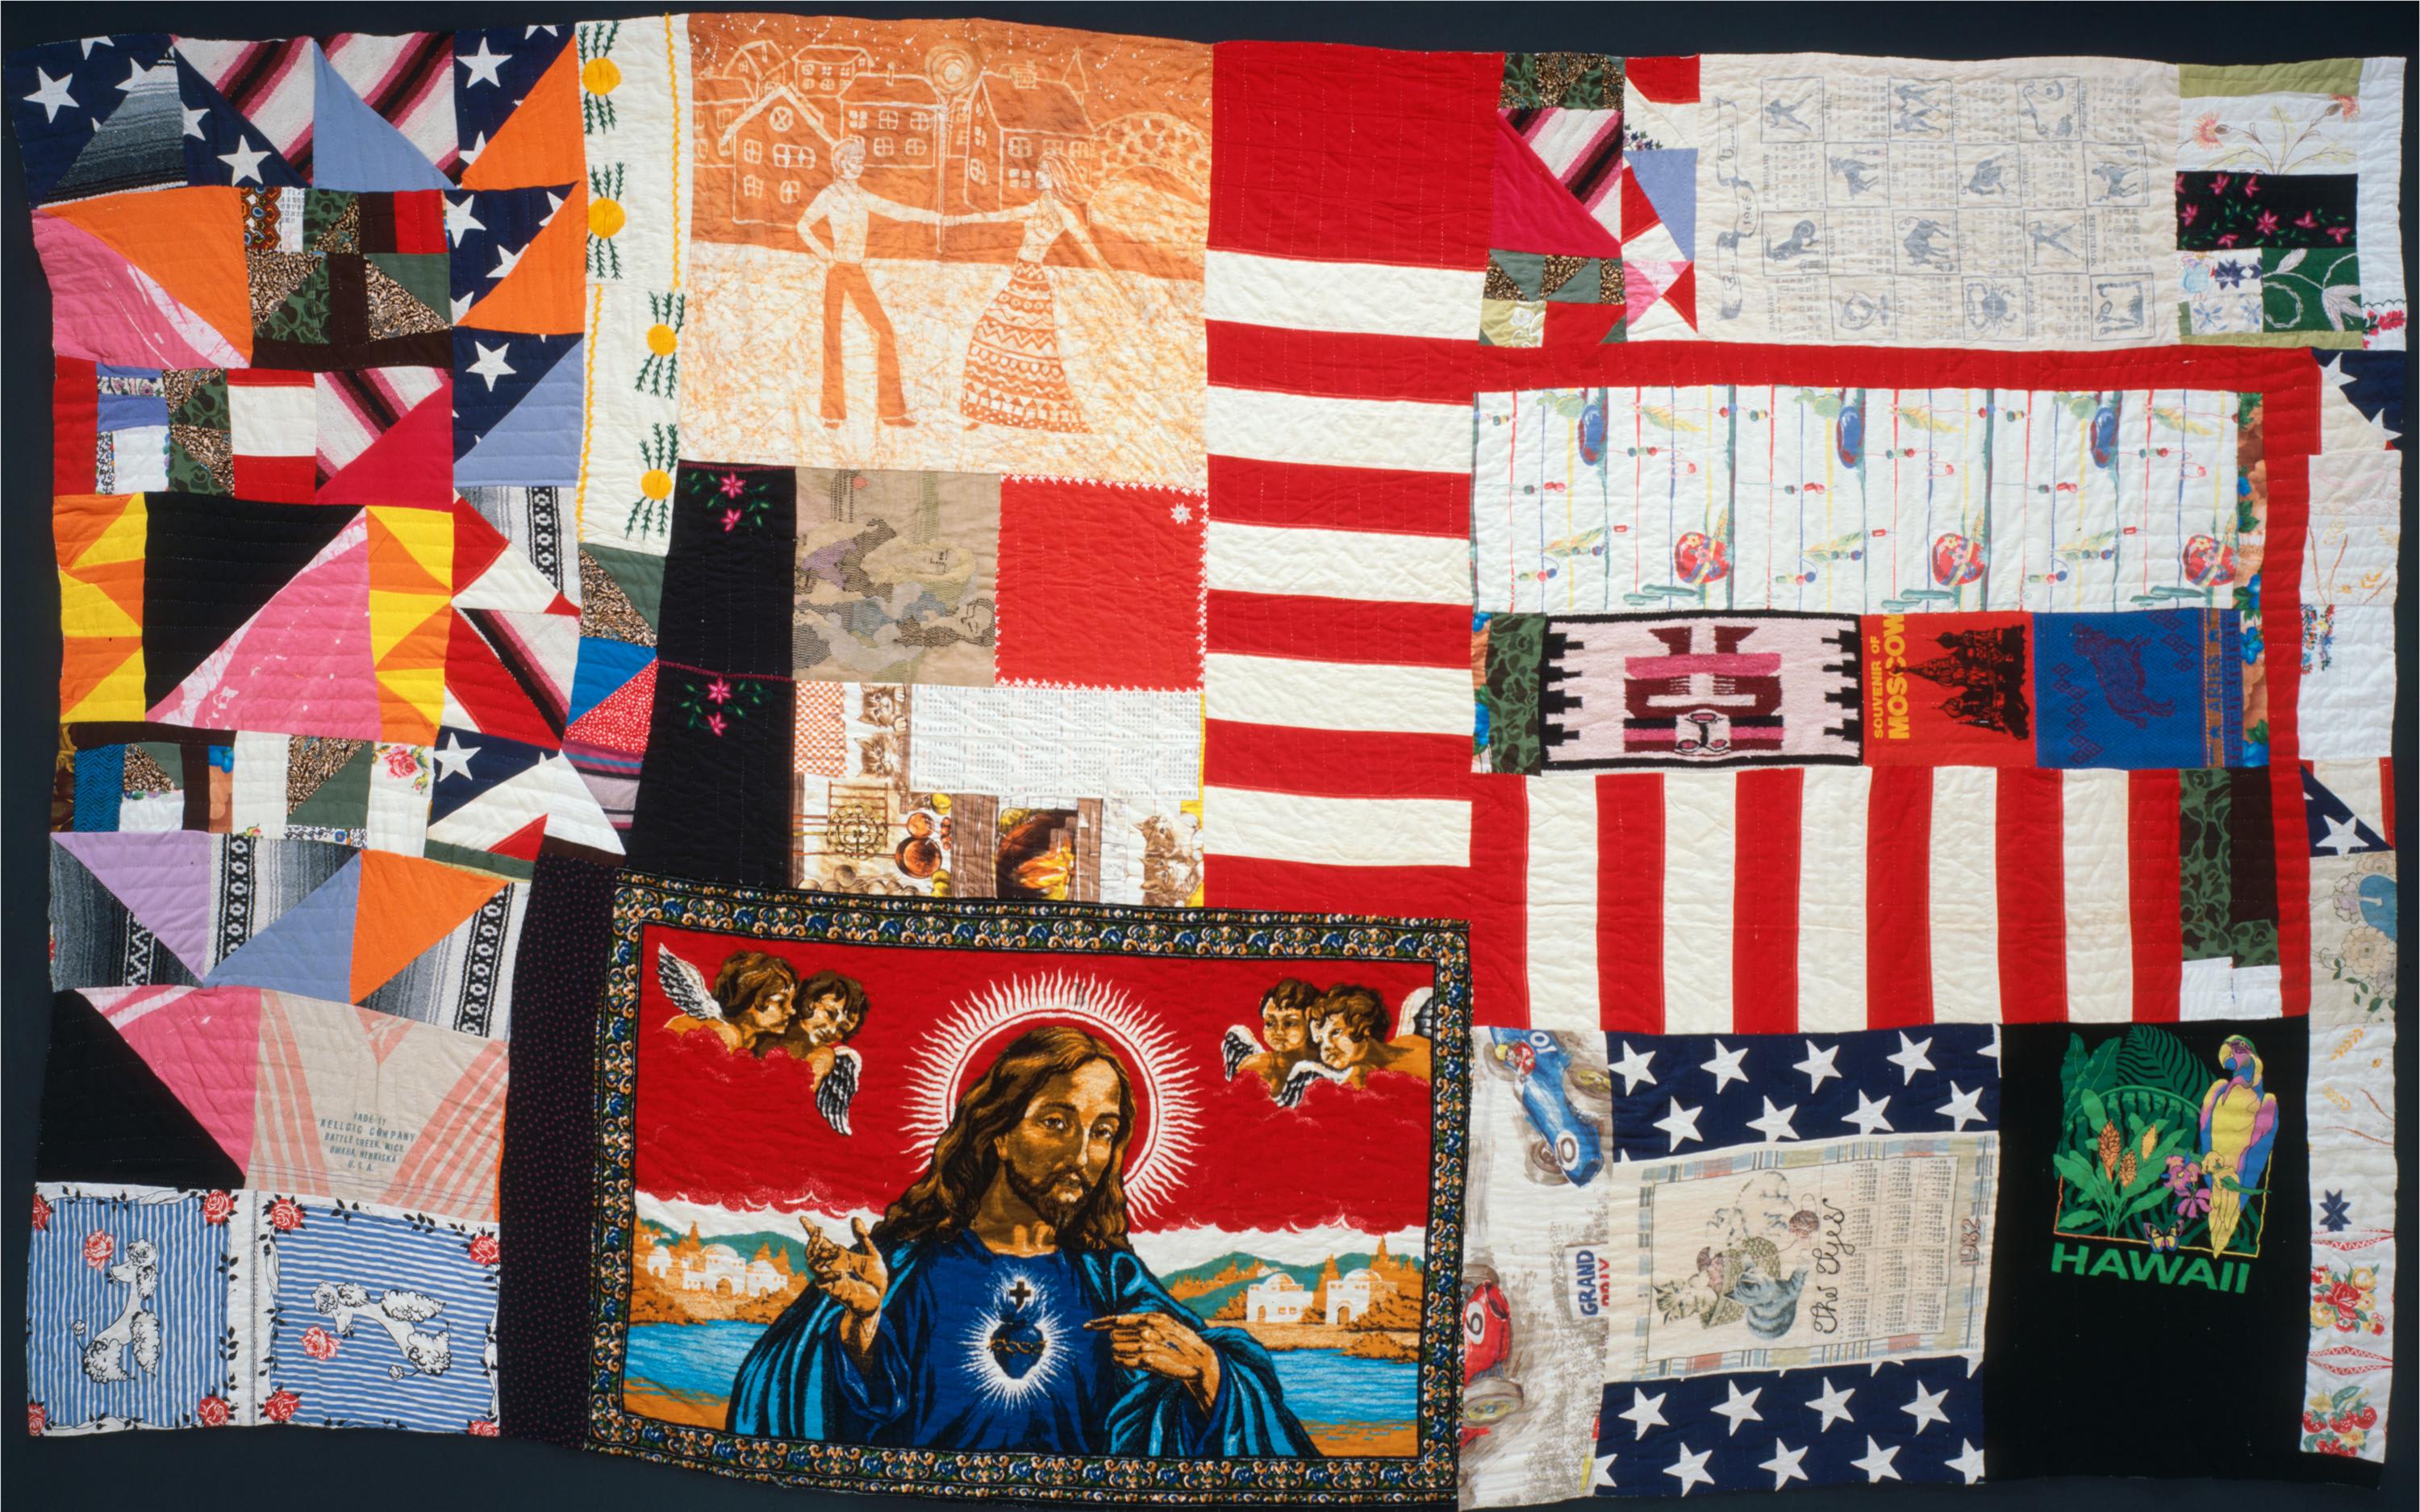 An untitled fabric collage-quilt by Rosie Lee Tompkins, 1996, chosen by curator Lynn Cooke for 'Outliers and American Vanguard Art.' Photo by Sharon Risedorph, courtesy of the Eli Leon Trust.